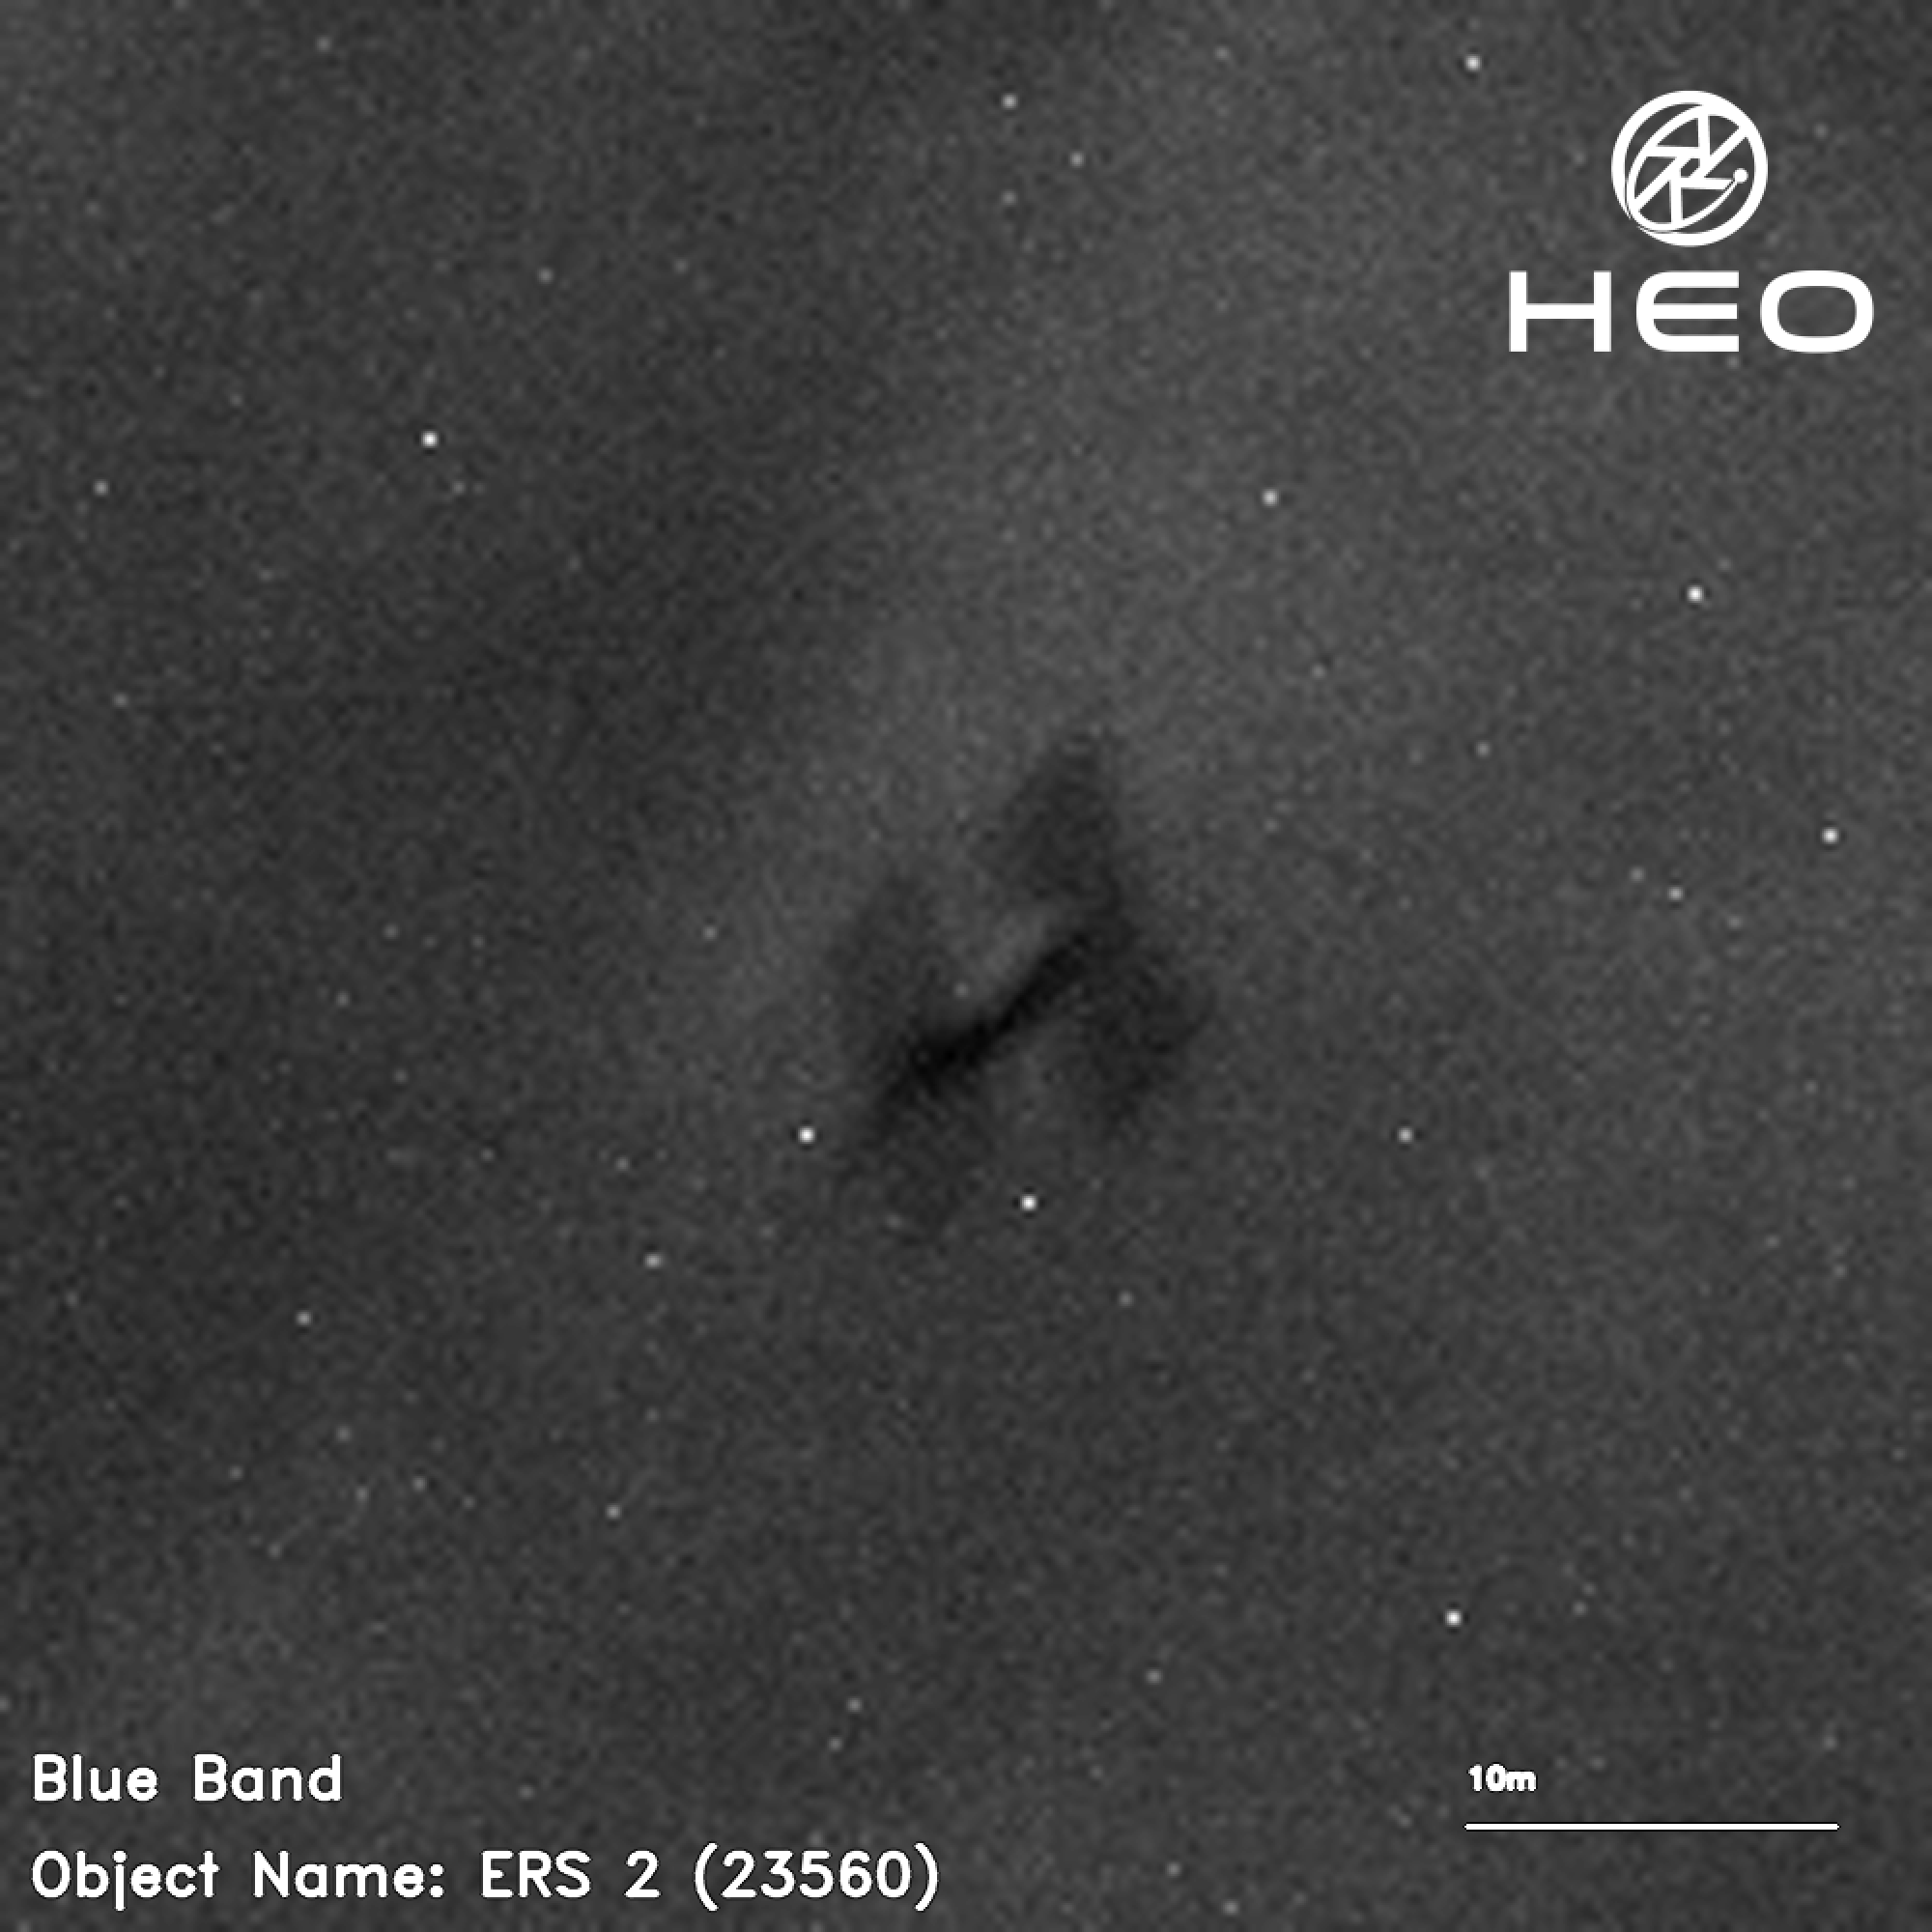 In this image from the space technology company HEO Robotics, the ERS-2 satellite resembles a "Star Wars" TIE fighter.